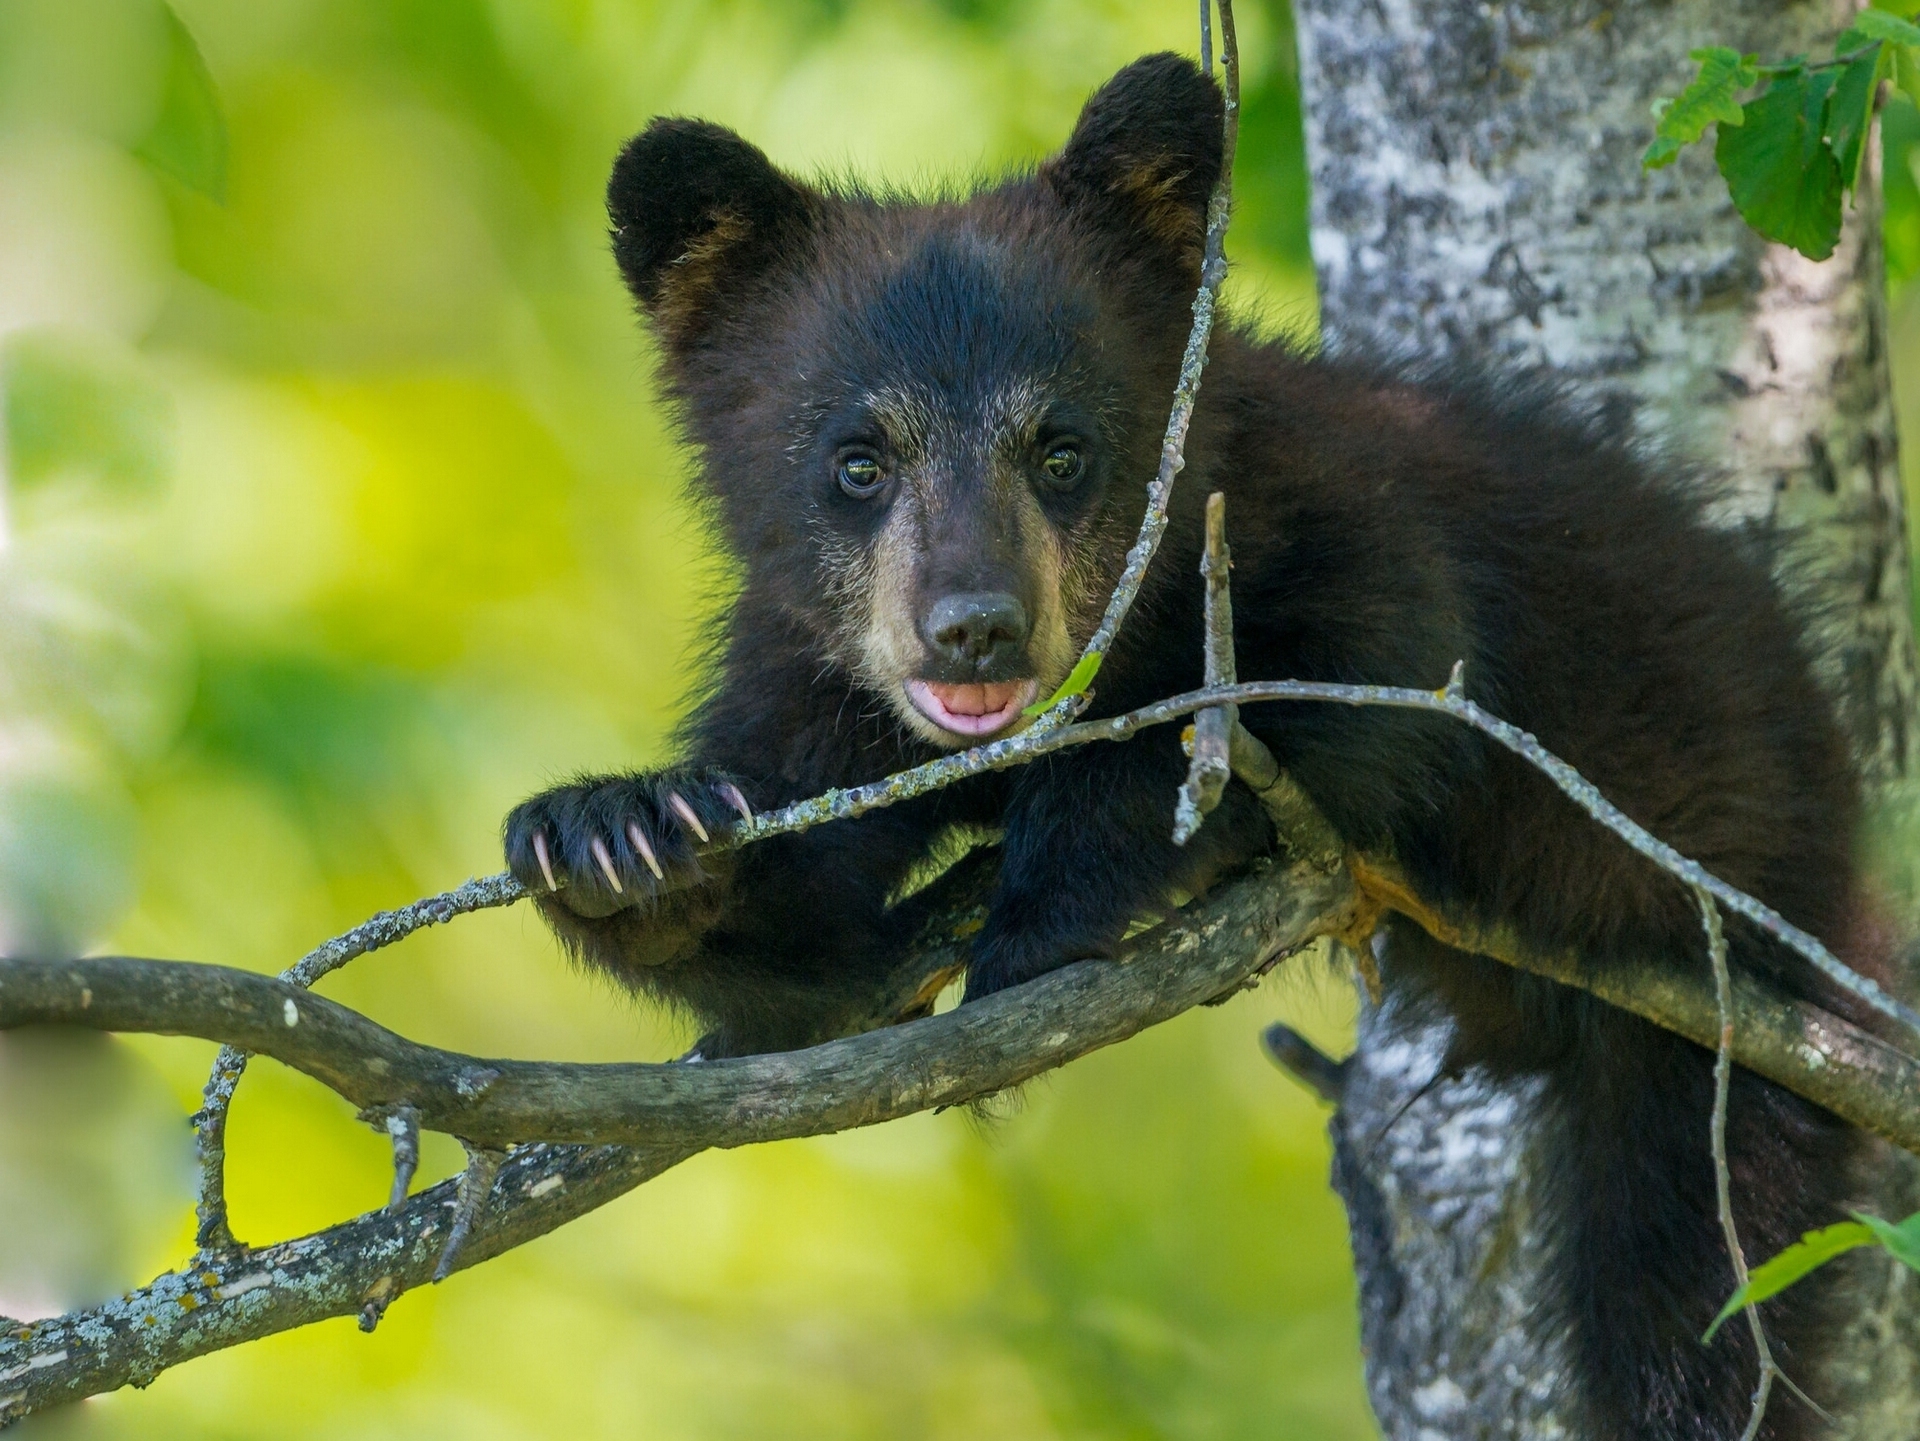 animals, sit, young, branches, bear, joey